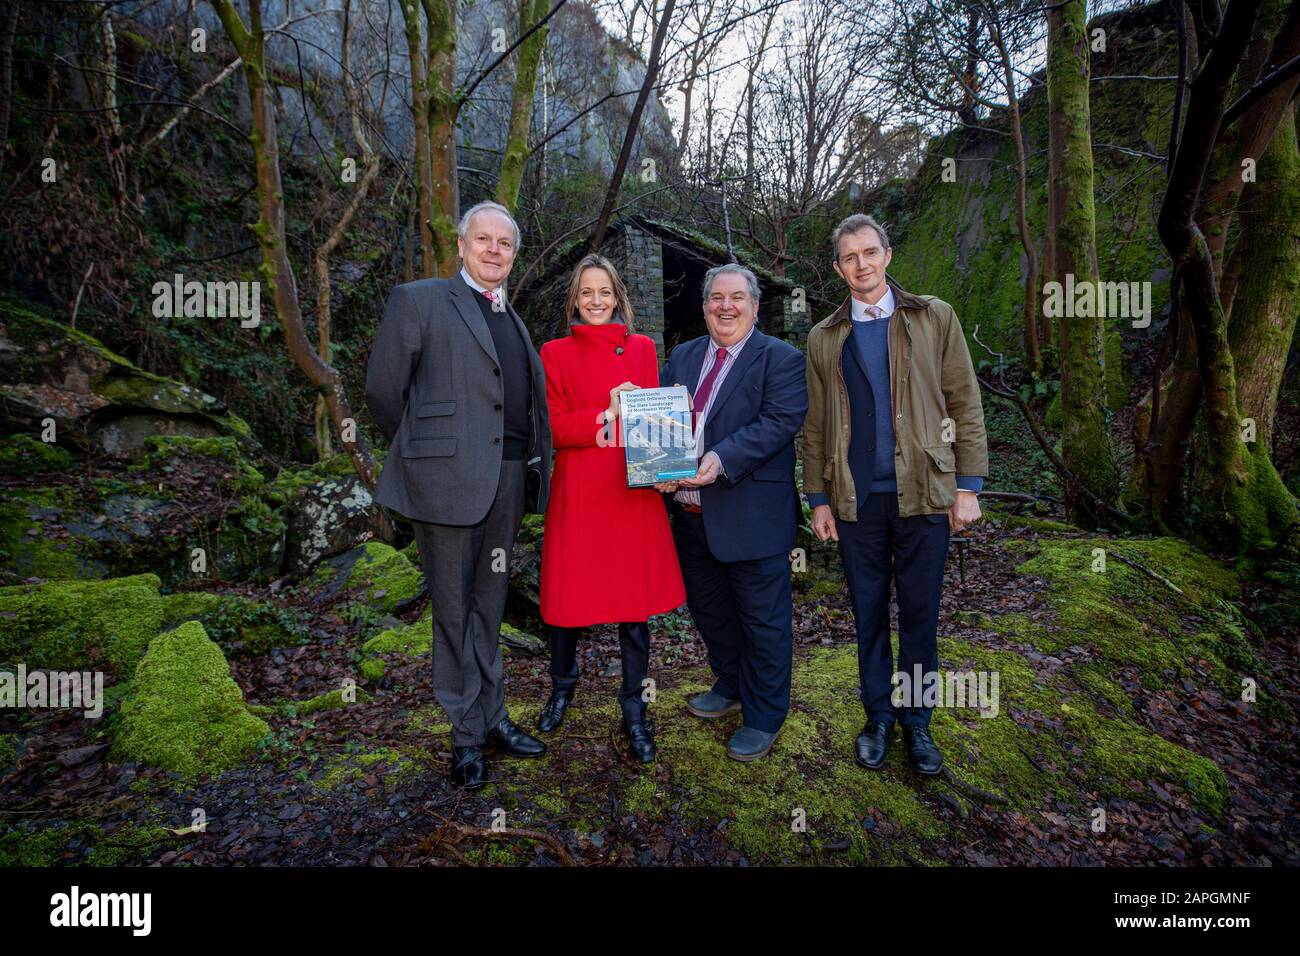 EMBARGOED TO 0001 FRIDAY JANUARY 24 (Left to right) Dr David Gwyn (historian, Heritage Minister Helen Whatley, Cllr Gareth Thomas and UK Welsh Minister David Davies at the Welsh Slate Museum in Llanberis, to mark the news that the slate mining landscape of northwest Wales could be the UK???s next UNESCO World Heritage site. Stock Photo